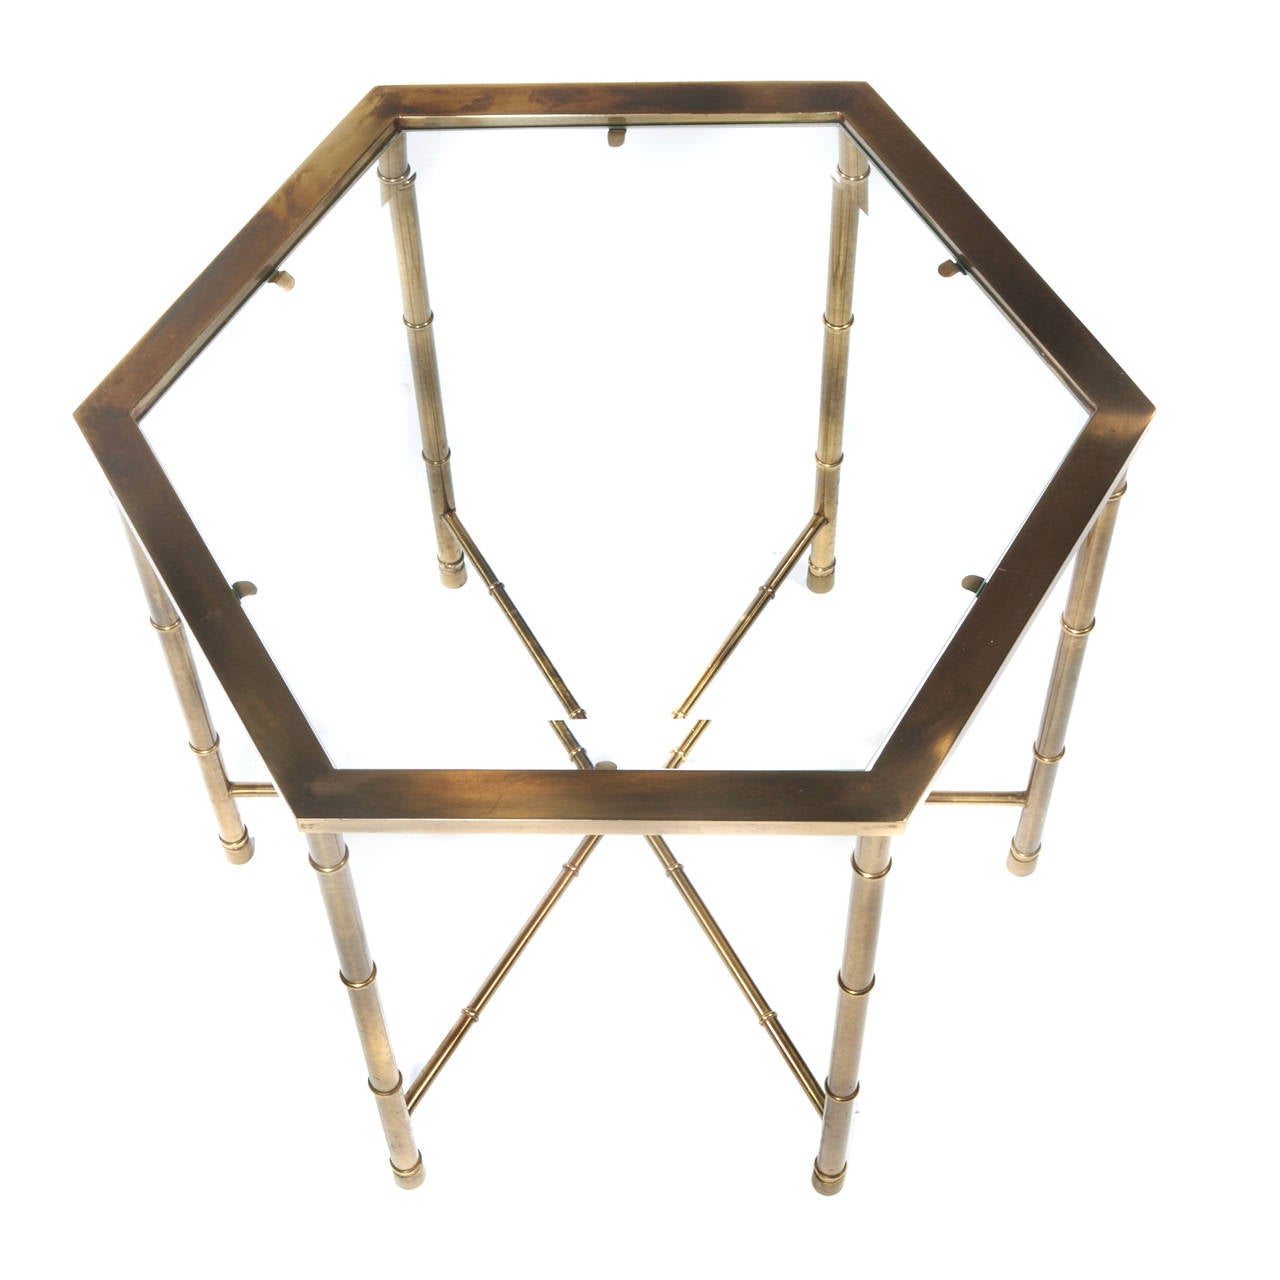 Pair of Burnished-Brass Hexagonal Tables by Mastercraft, circa 1970s 1